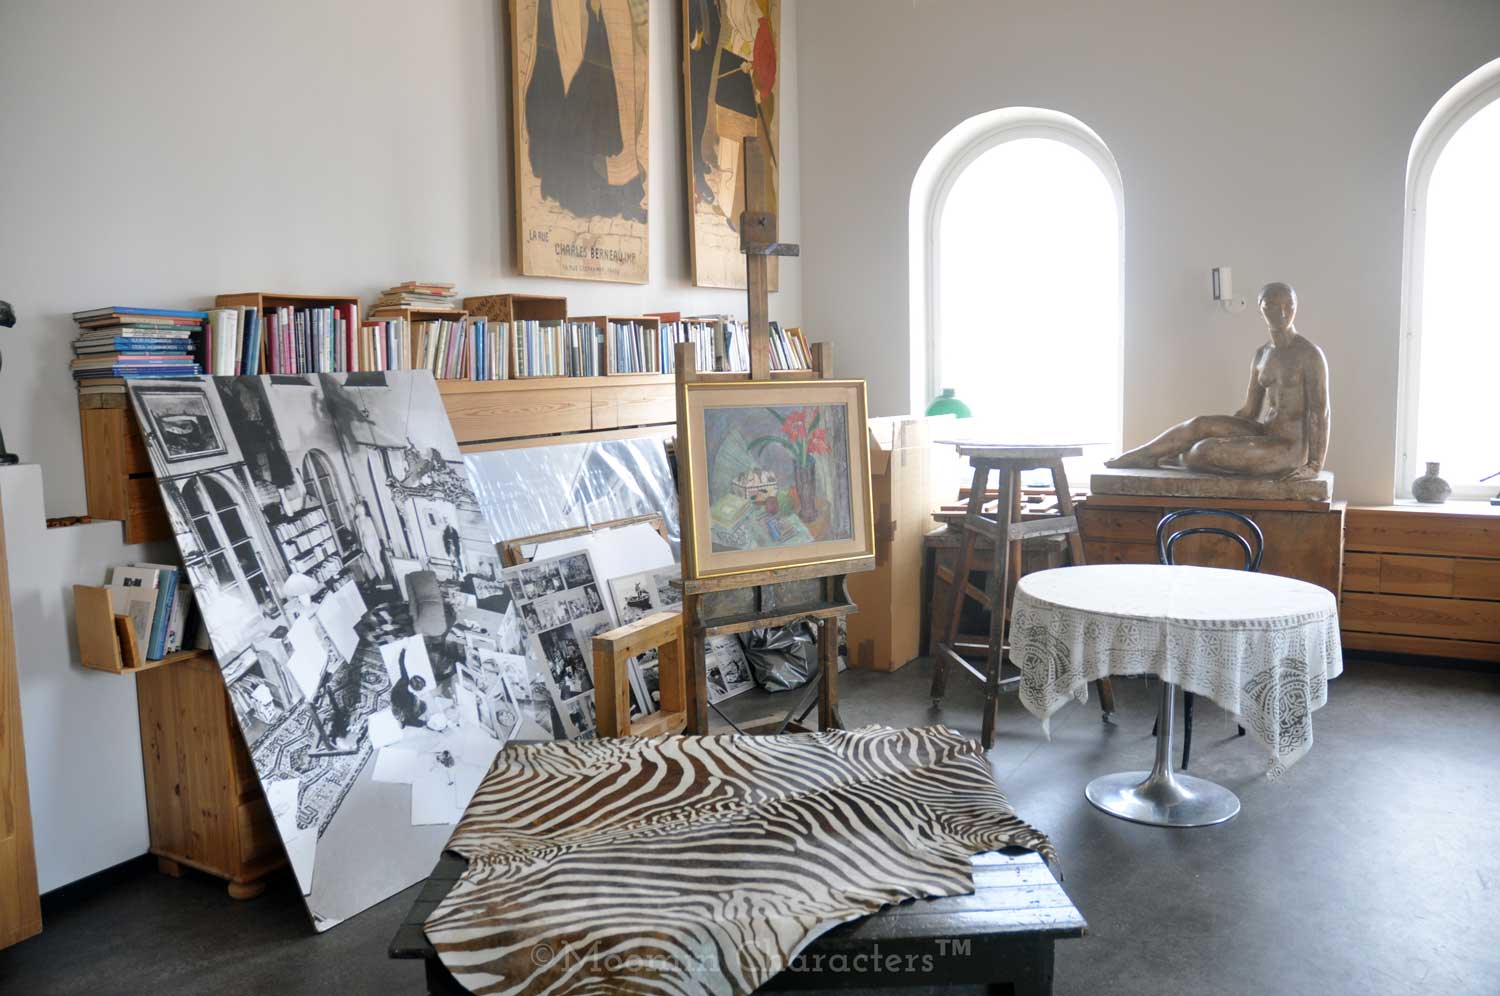 Tove Jansson's Helsinki studio: take a look at our exclusive photos